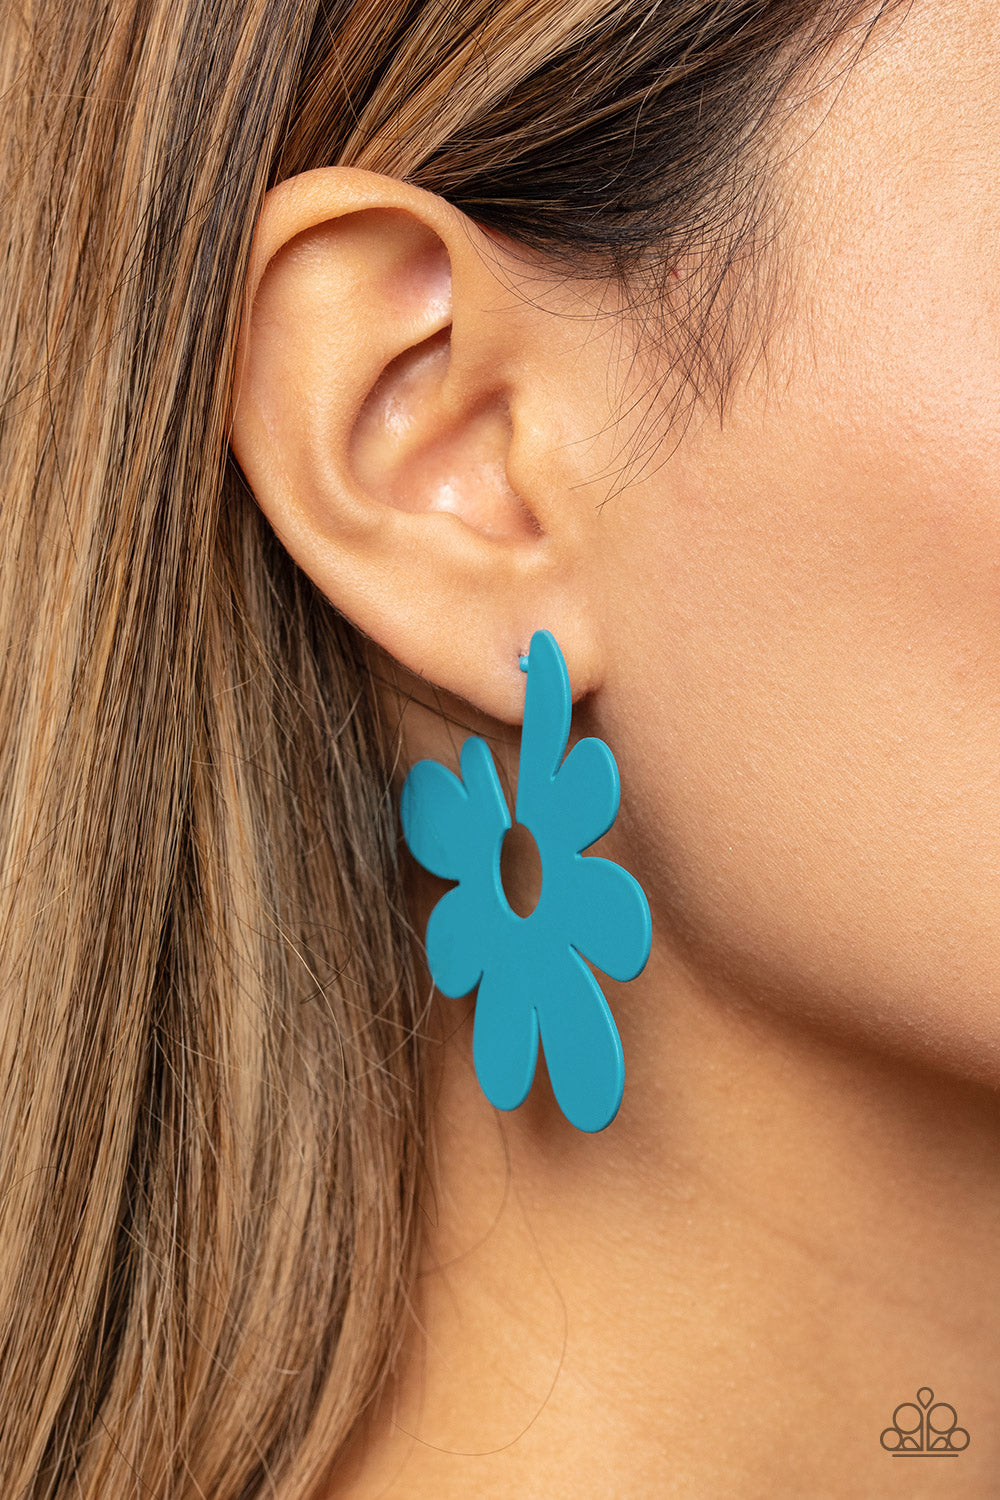 Asymmetrical, oversized blue petals bloom into an abstract flower hoop for a fashionable, attention-grabbing pop of color around the ear. Earring attaches to a standard post fitting. Hoop measures approximately 2